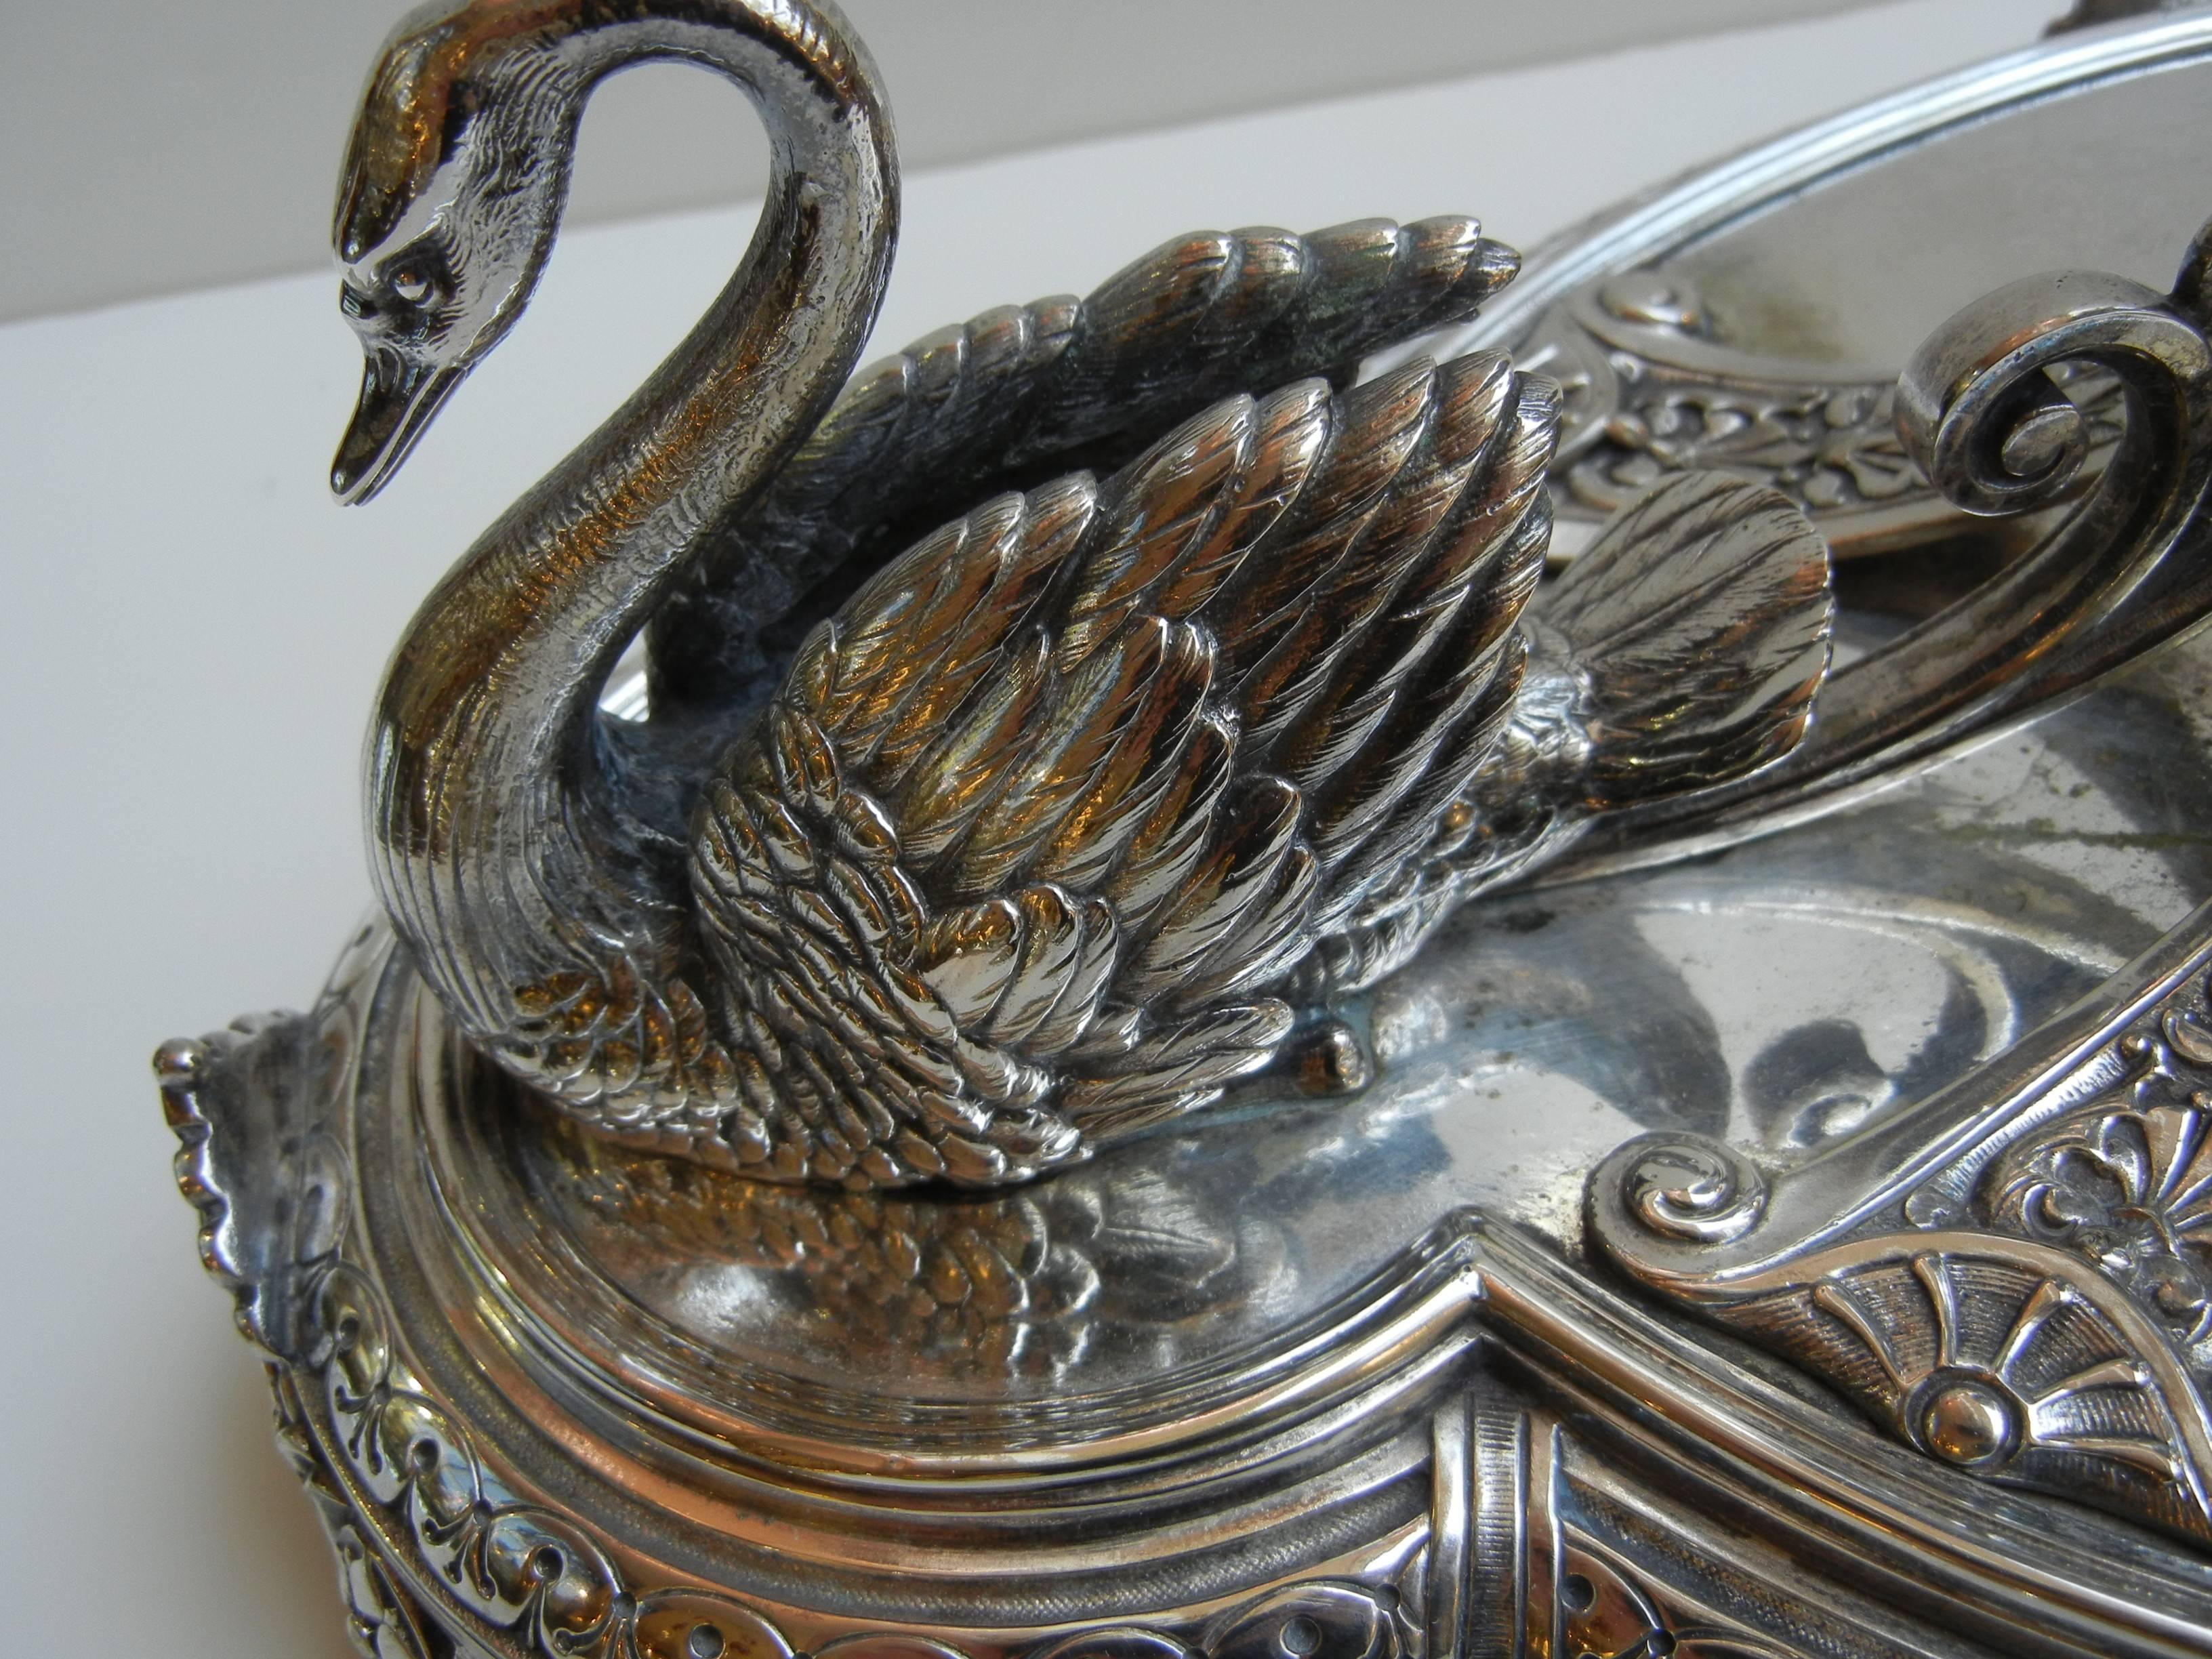 A fabulous large Elington & Co. table centrepiece having swans on two ends raised in the center with a beautiful red cut to clear Bohemian crystal bowl.

Marked Elkington & Co. on bottom.

Measures: 19.5 inches long x 17.5 inches